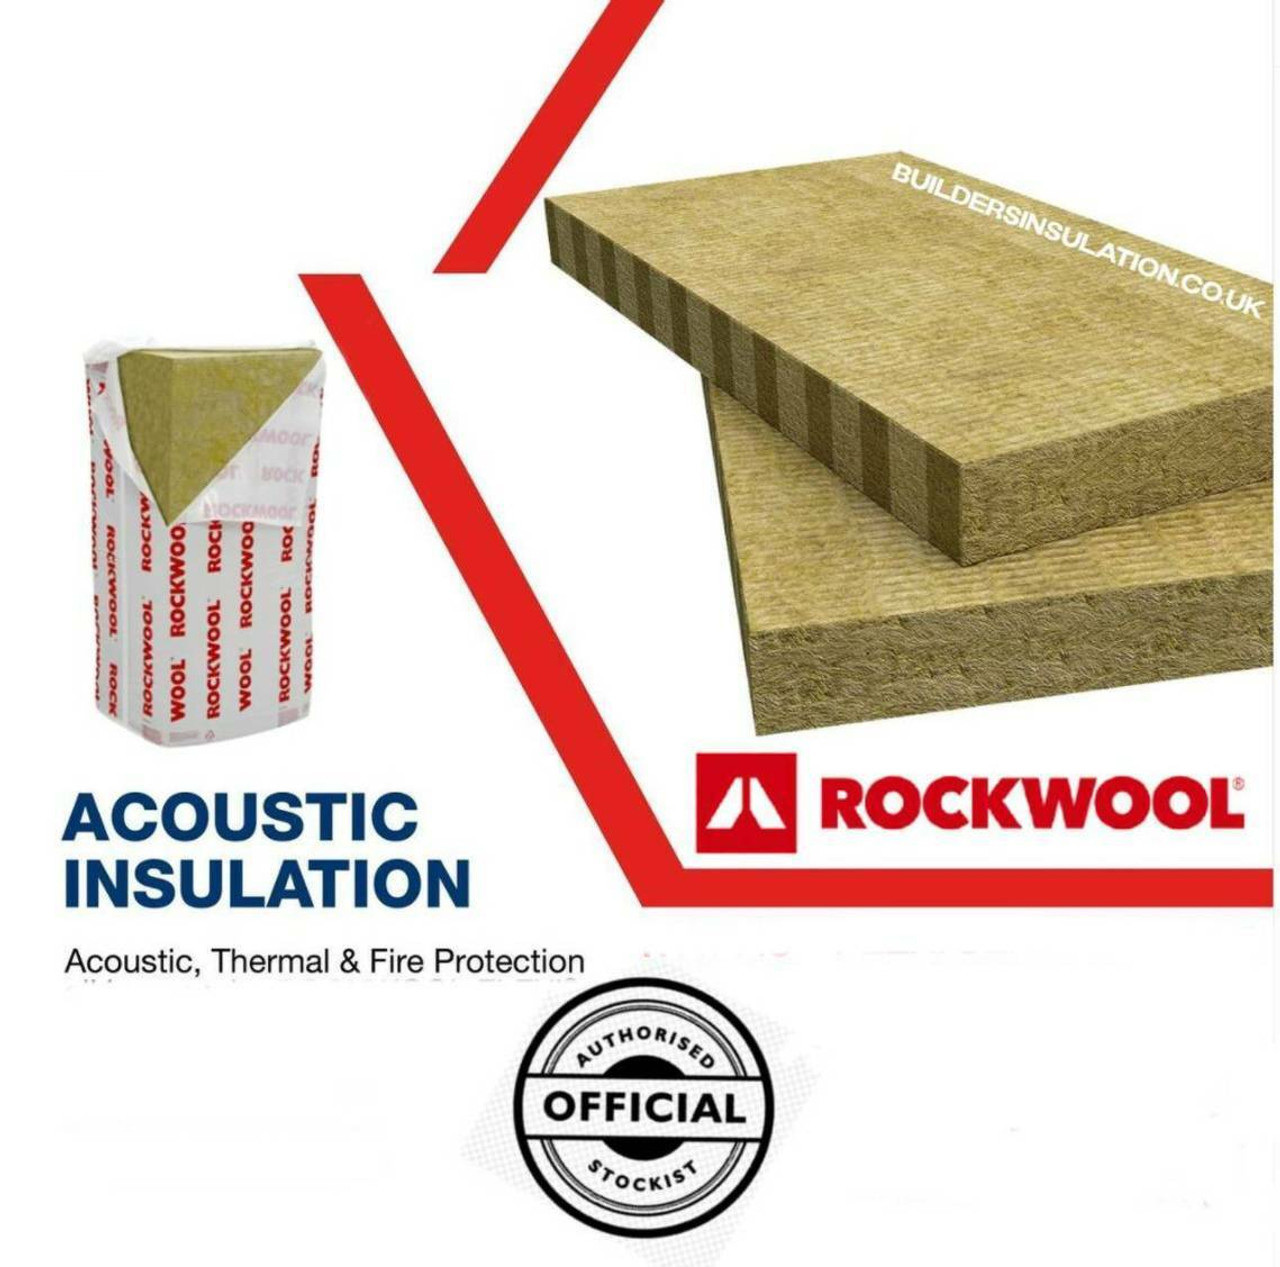 50mm - Rockwool Flexi Slab Acoustic Sound Insulation 1200mm x 600mm x 50mm - 8.64m2 Pack  10014957 RKW-50262